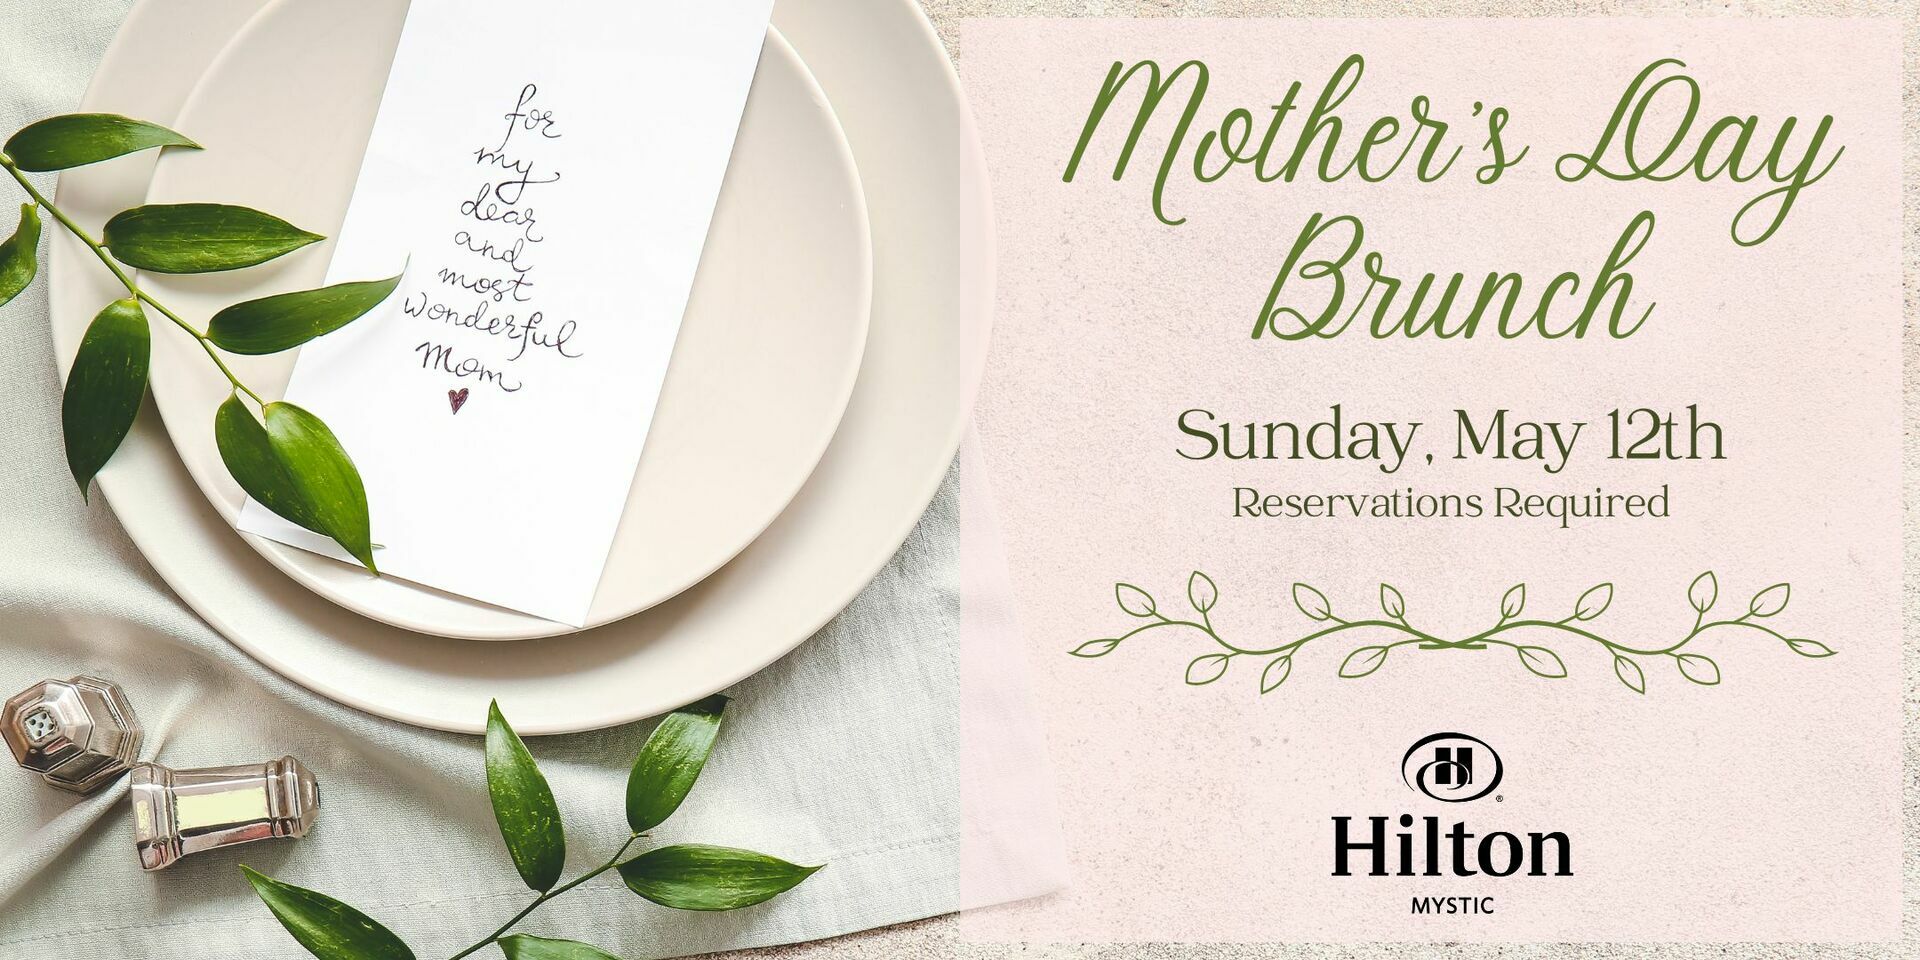 Mother's Day Brunch at Hilton Mystic, Mystic, Connecticut, United States